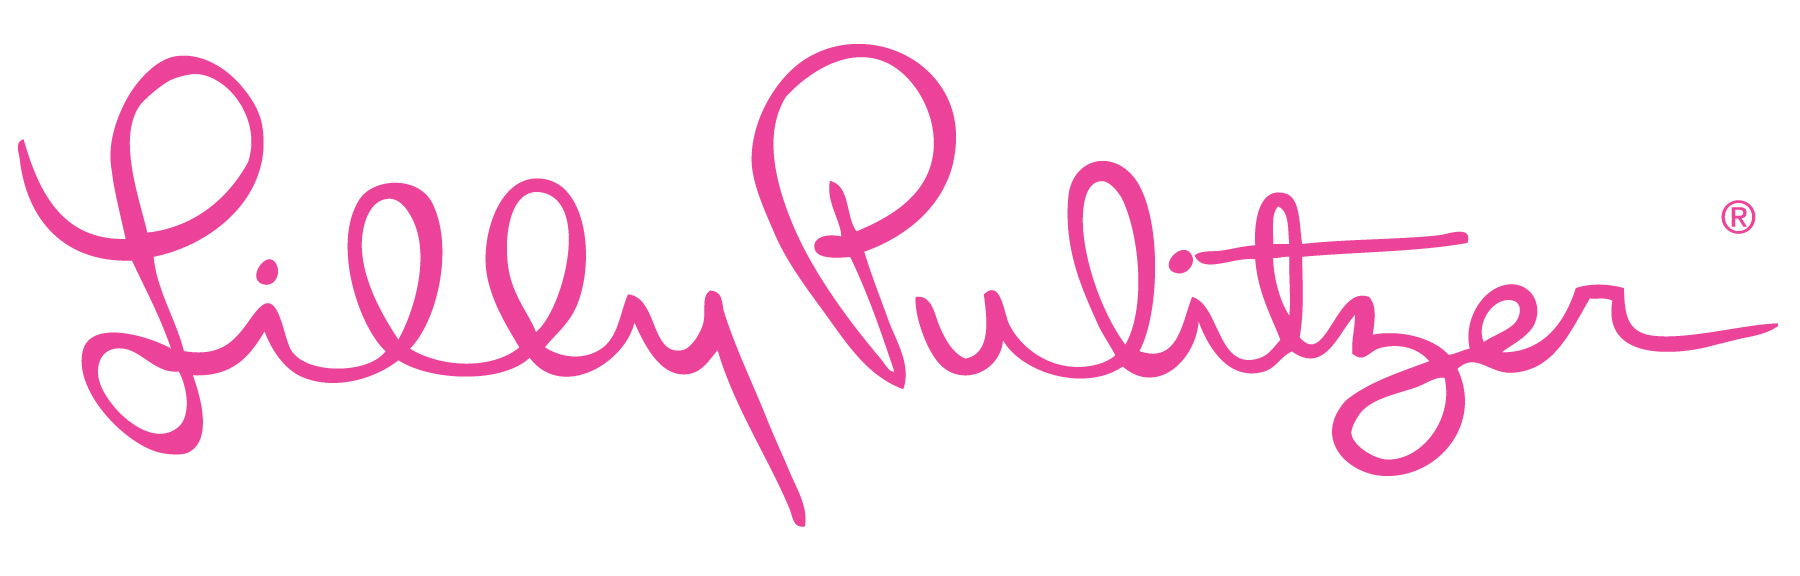 Lilly Pulitzer Breast Cancer Research Foundation